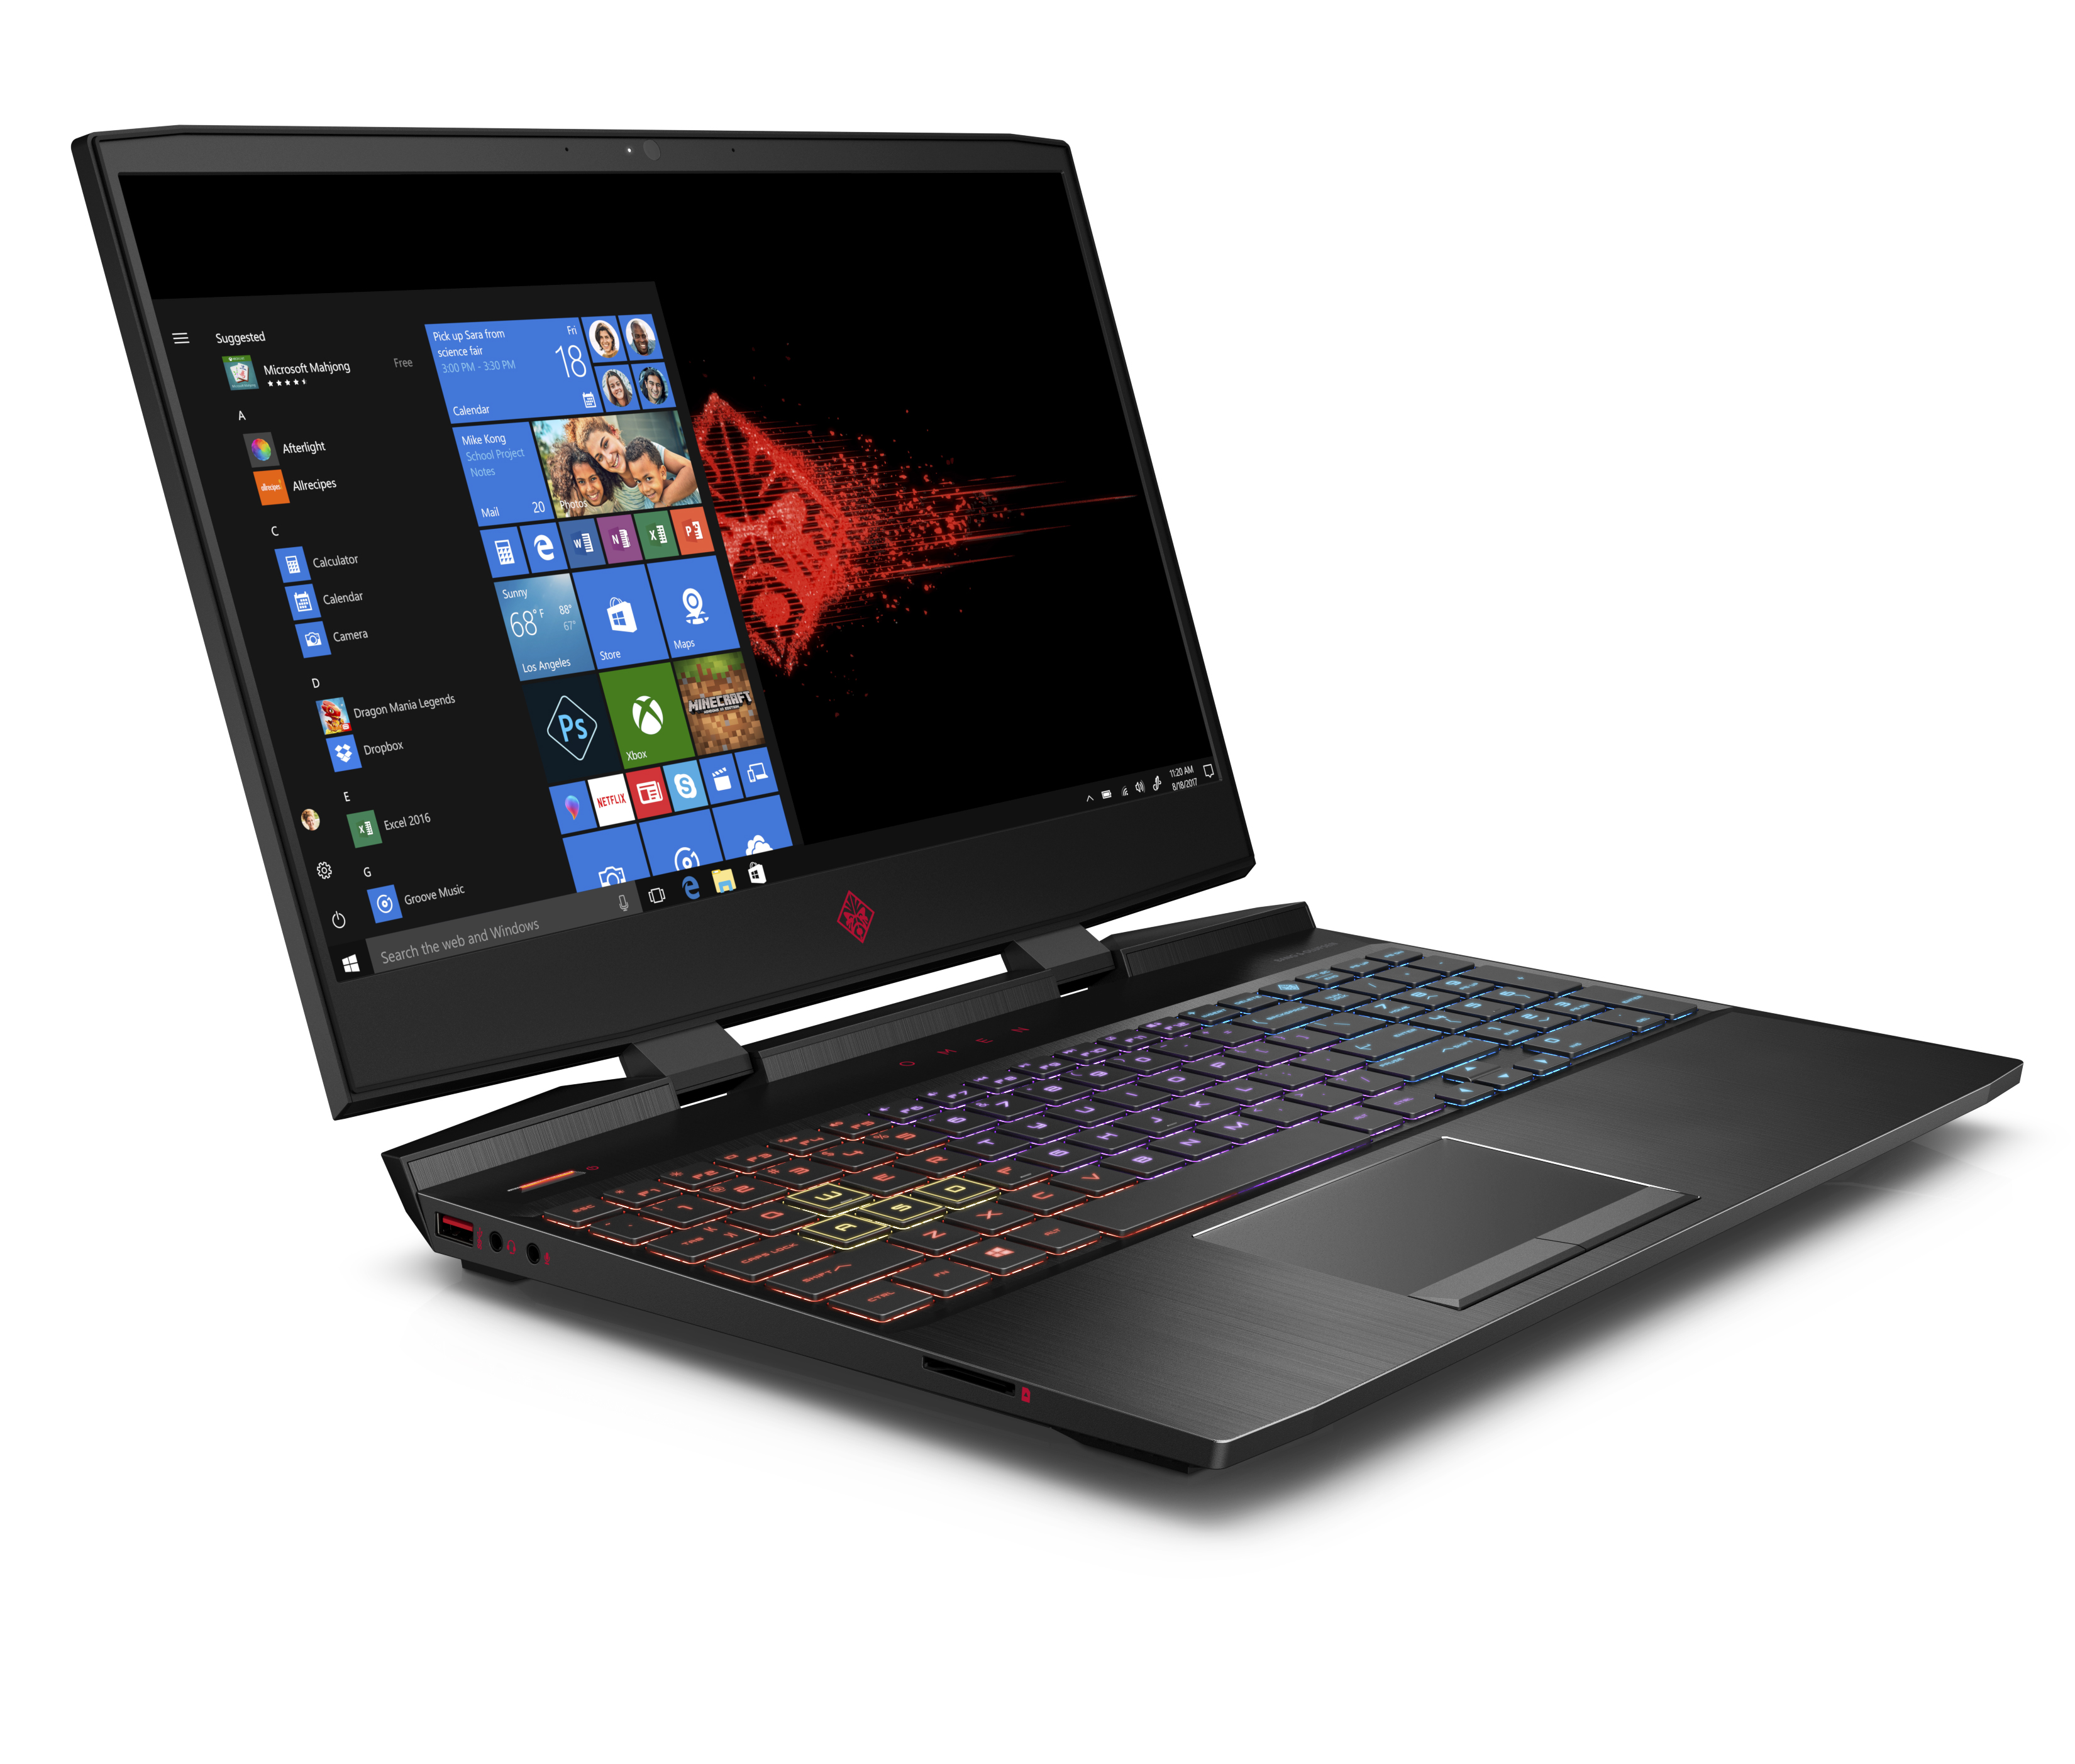 Omen by HP Gaming Laptop 15.6", Intel Core i7-9750H, NVIDIA GTX 1660Ti 6GB, 16GB RAM, 256GB SSD, Omen Headset and Mouse Included ($100 Value), 15-dc1088wm - image 2 of 9